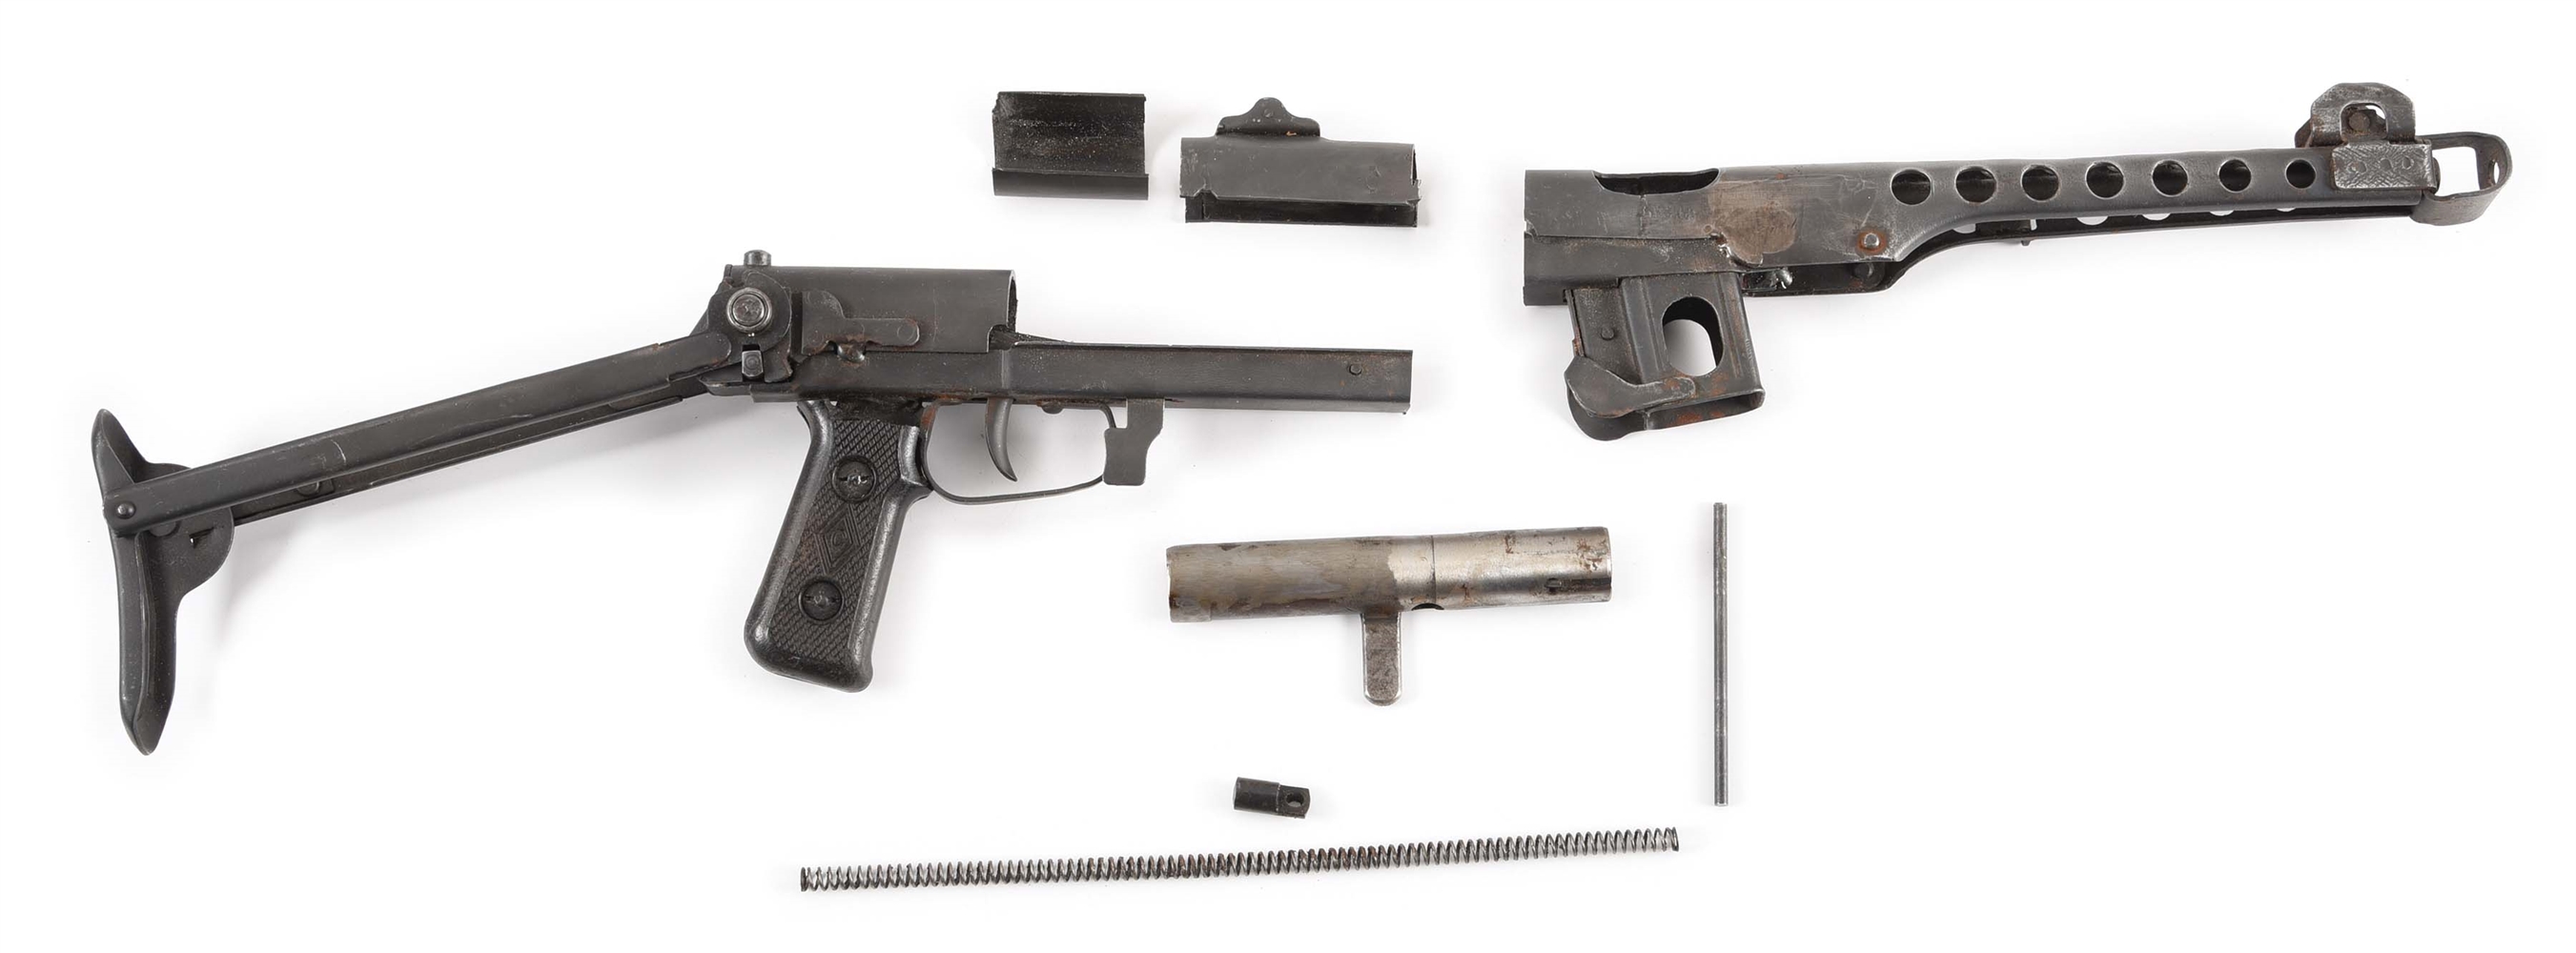 CHINESE PPS-43 PARTS KIT.